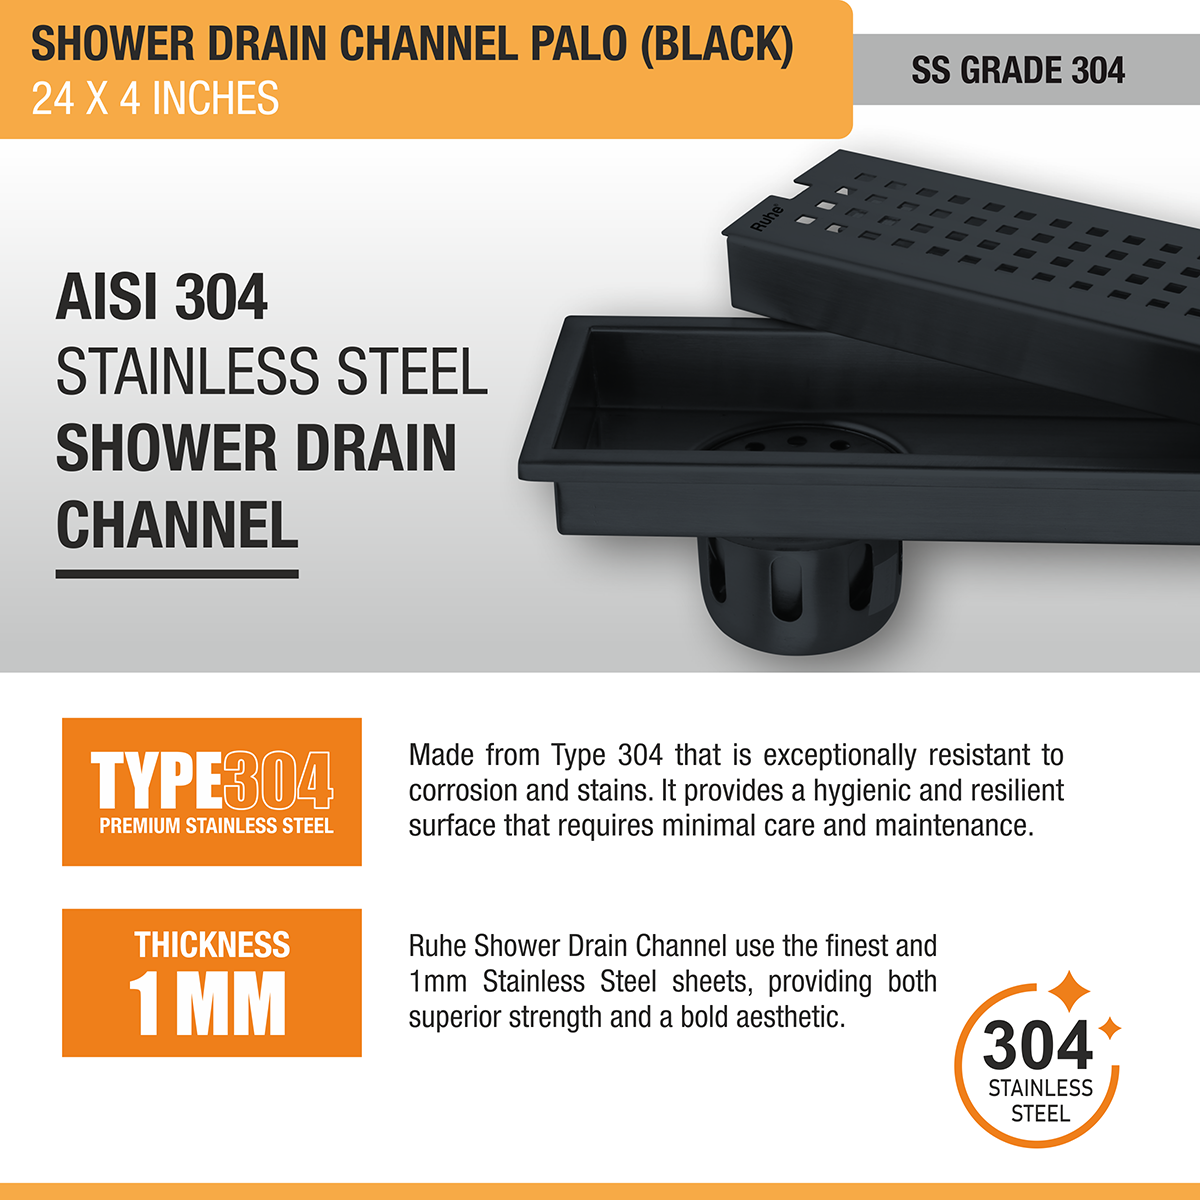 Palo Shower Drain Channel (24 x 4 Inches) Black PVD Coated stainless steel